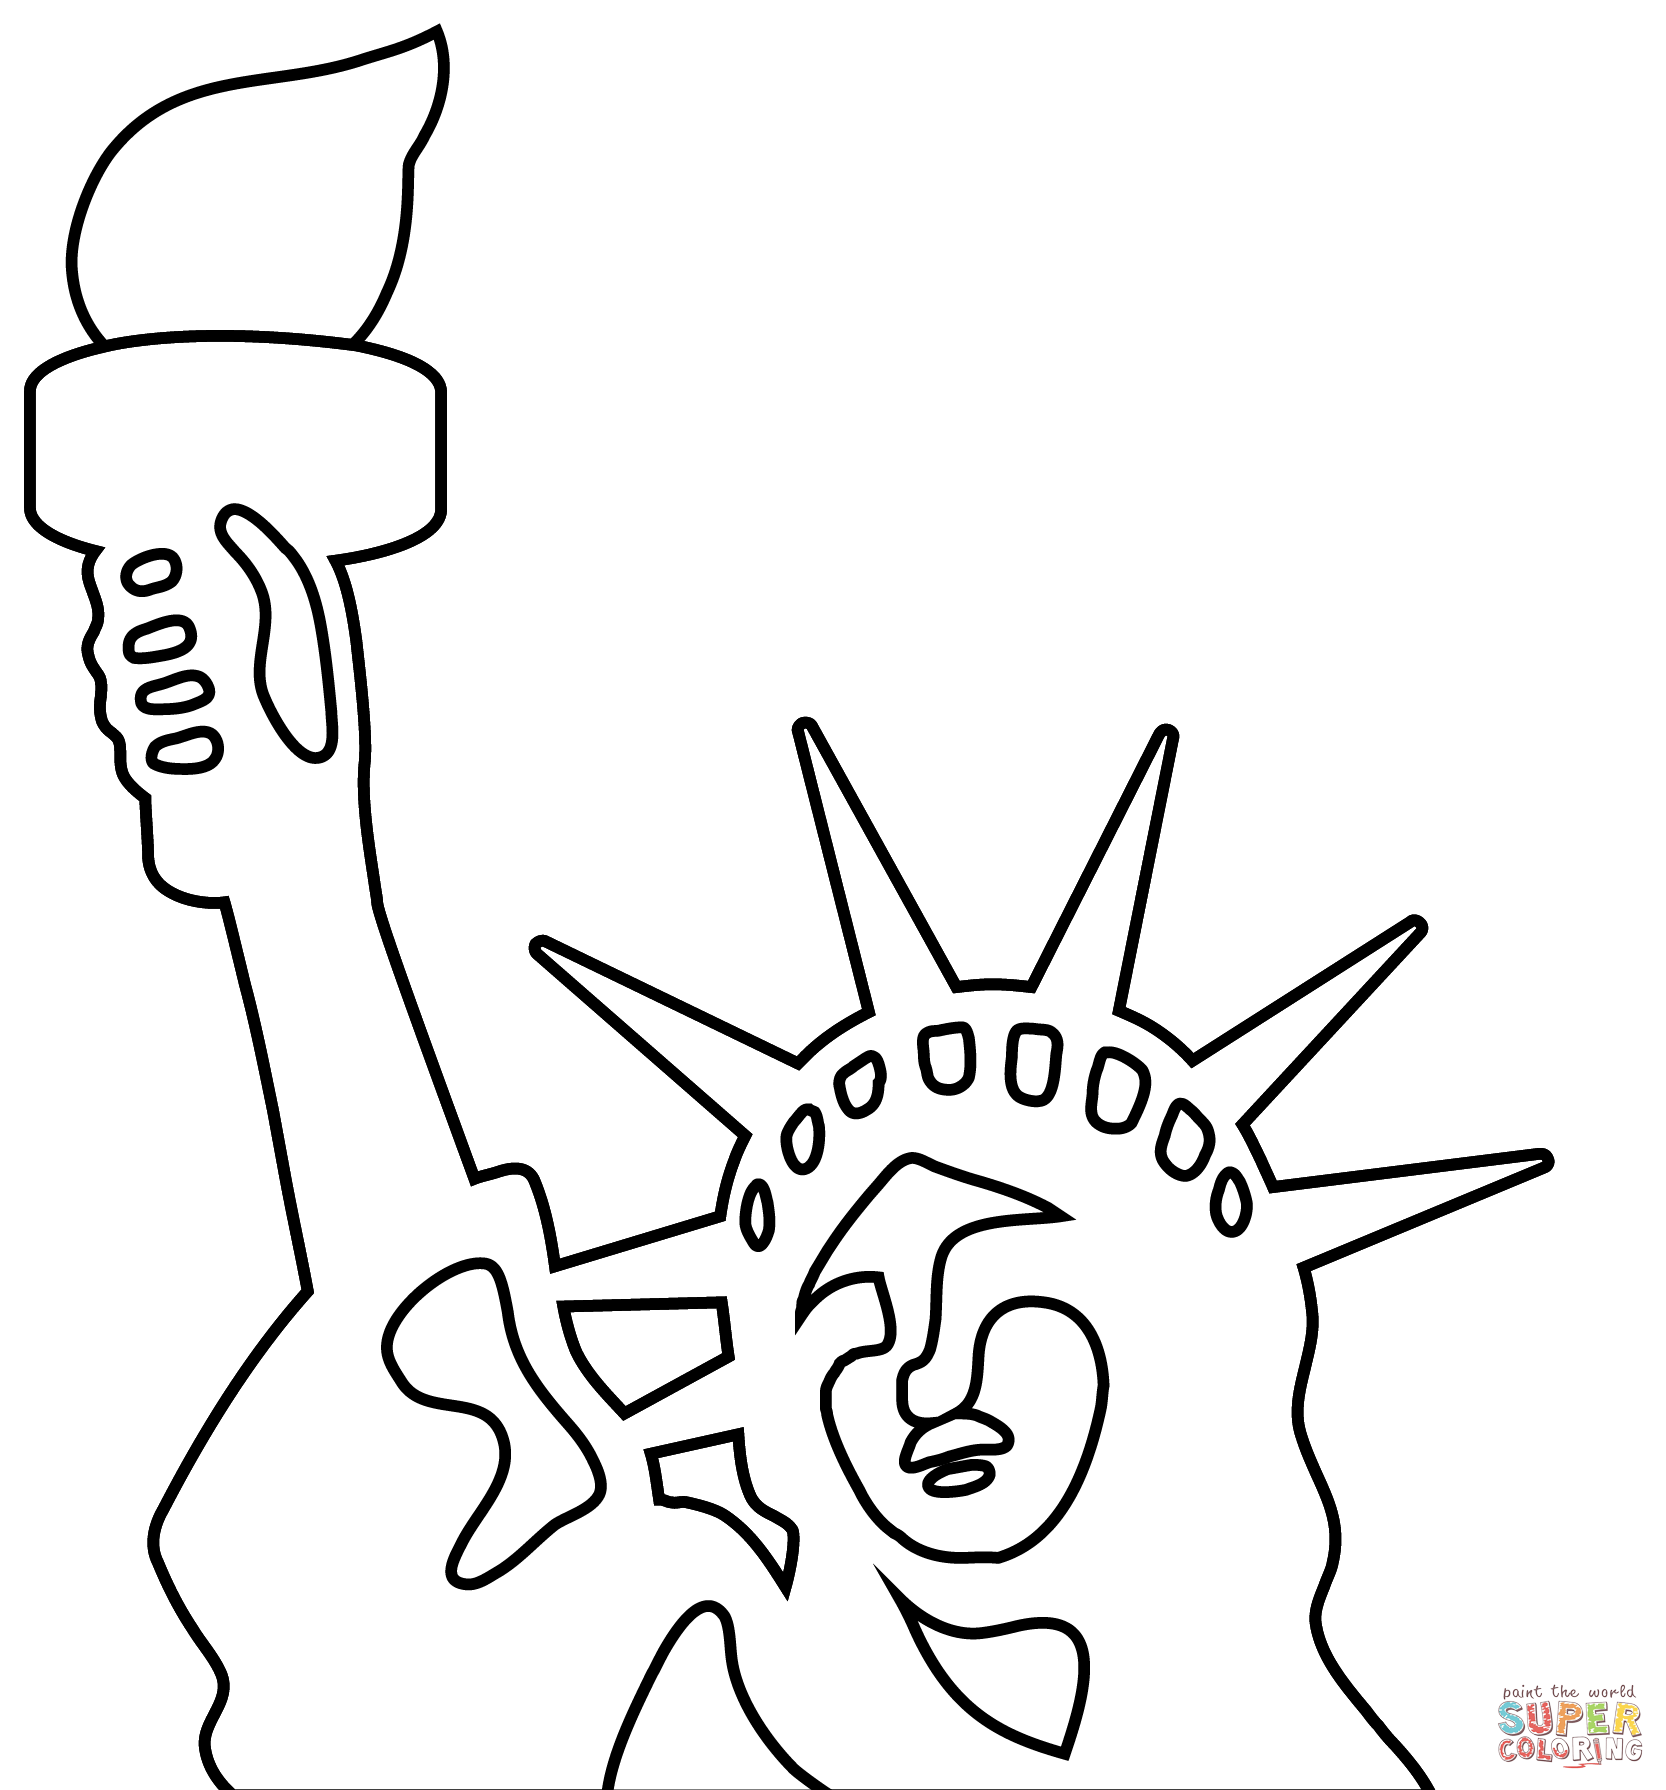 Statue of liberty emoji coloring page free printable coloring pages